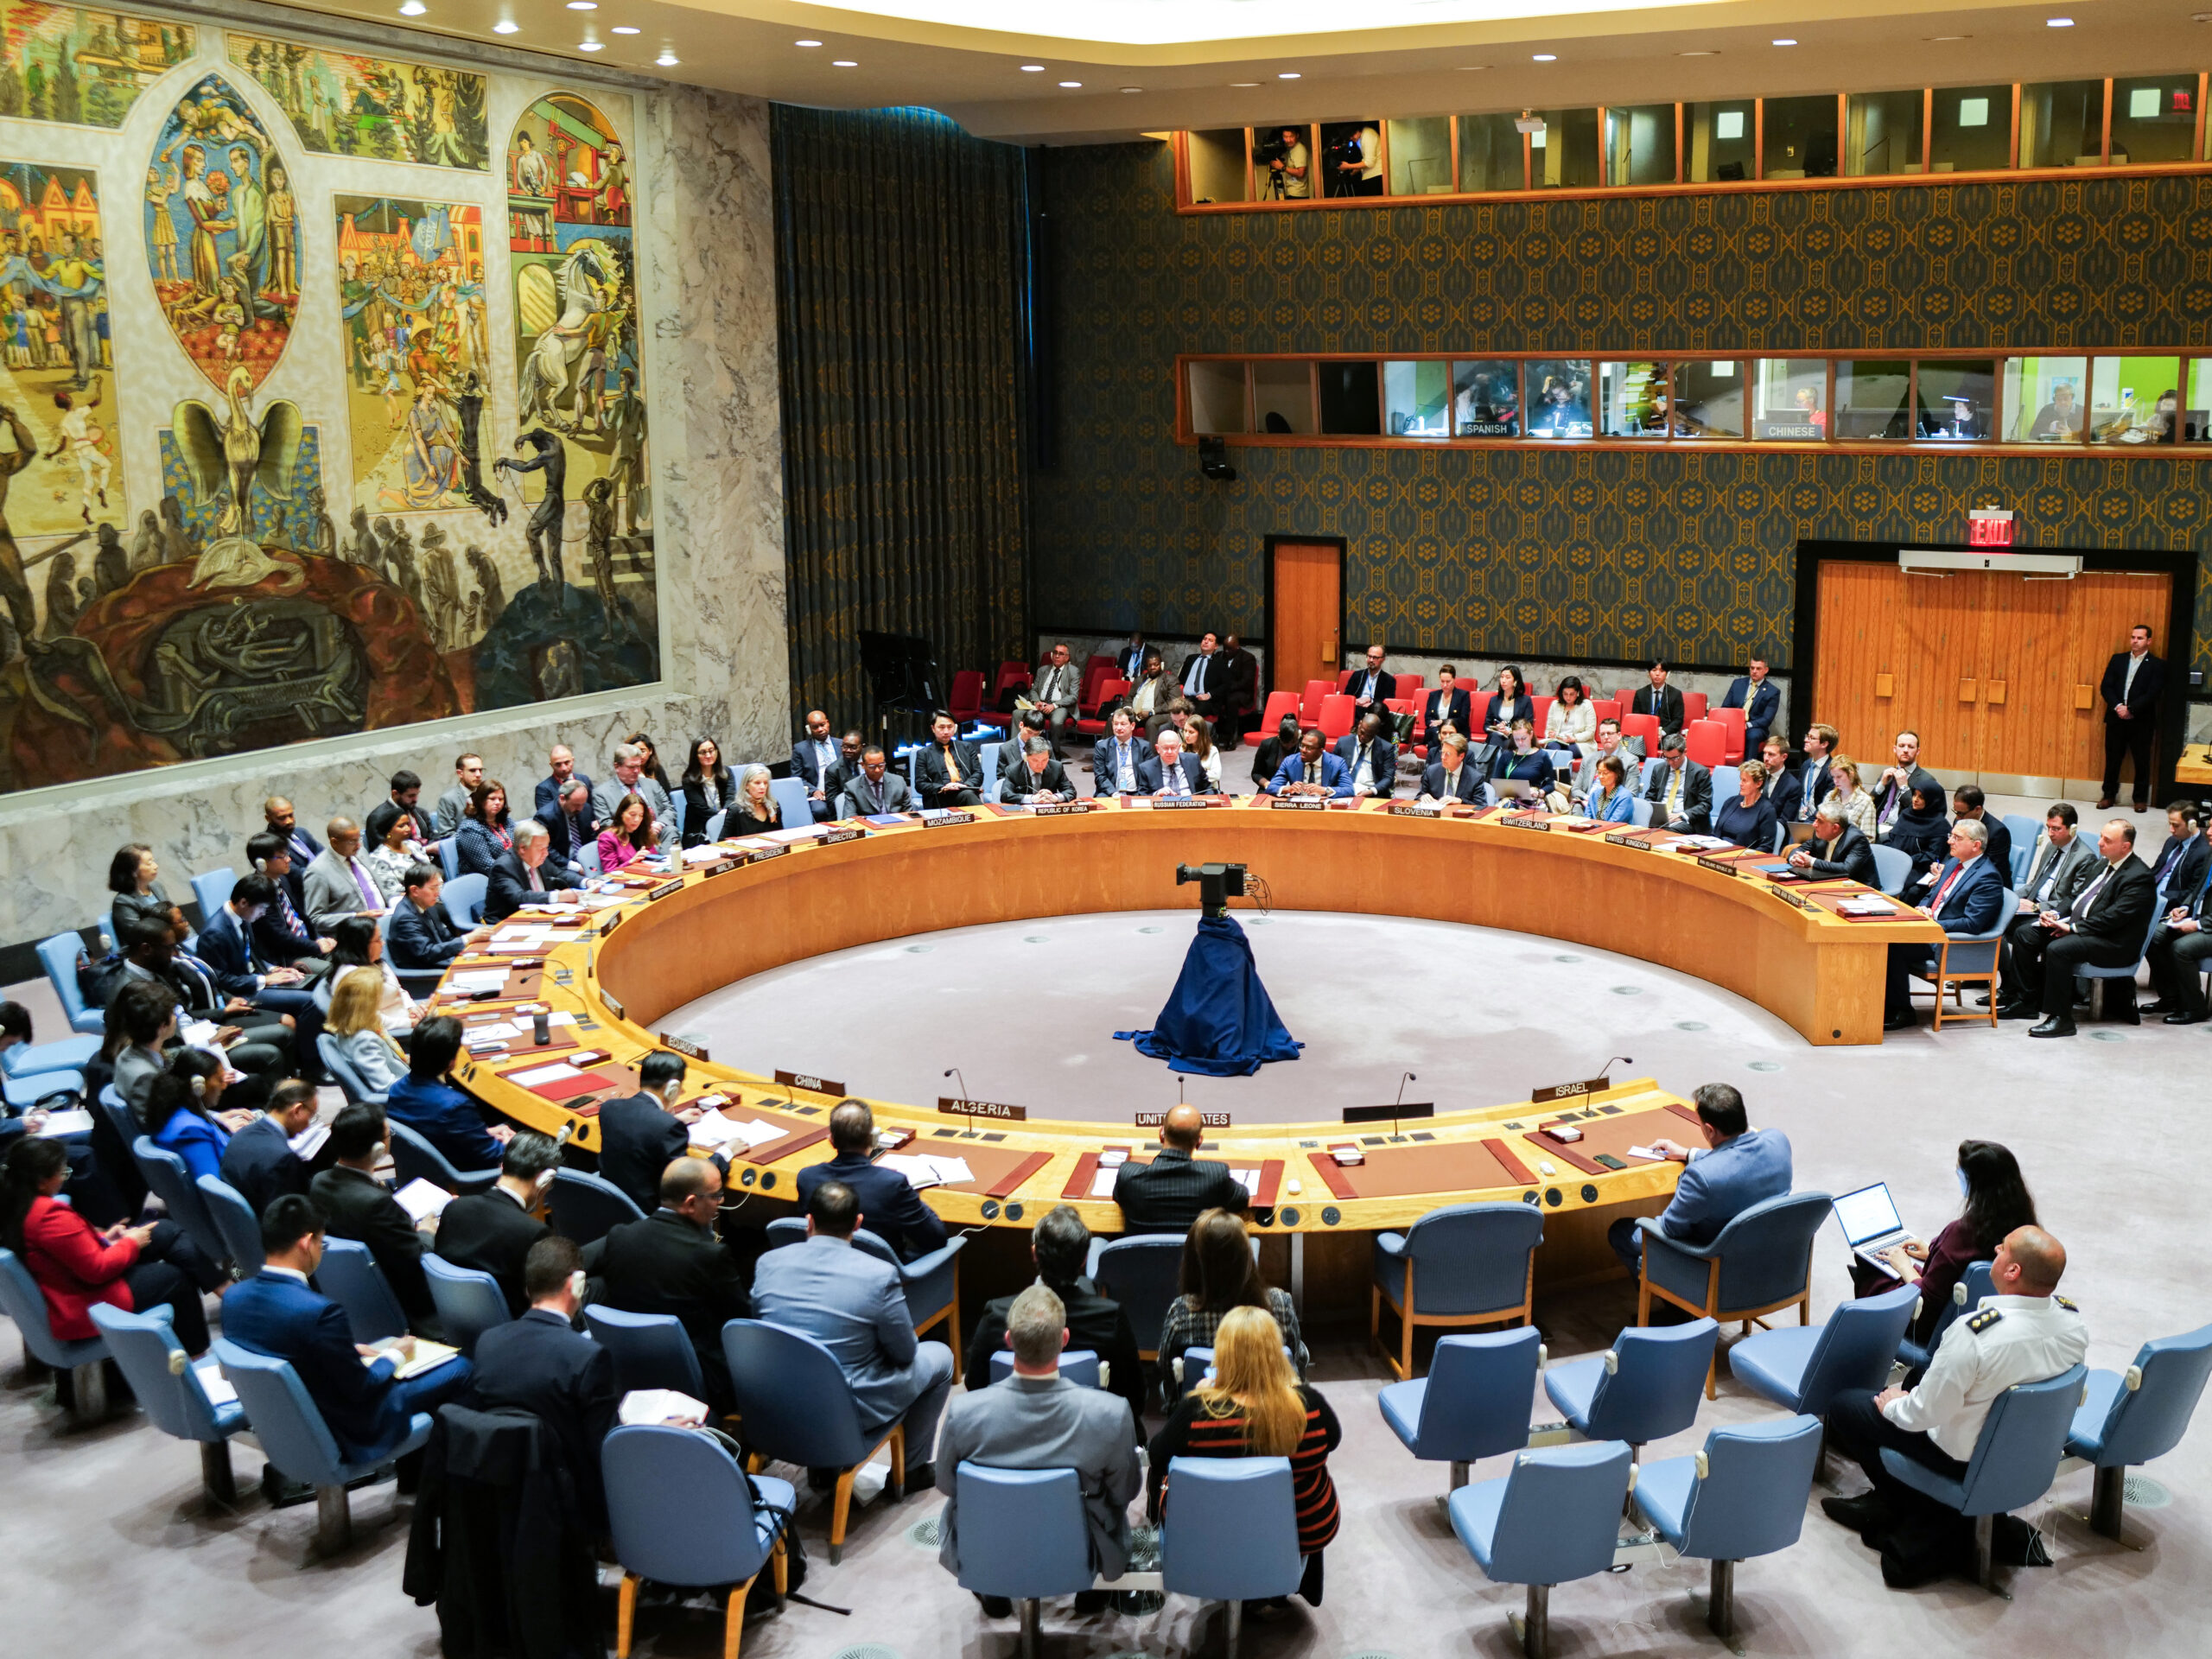 The United Nations Security Council holds a meeting on the situation in the Middle East, including Iran's recent attack against Israel, at U.N. headquarters in New York City on Sunday.